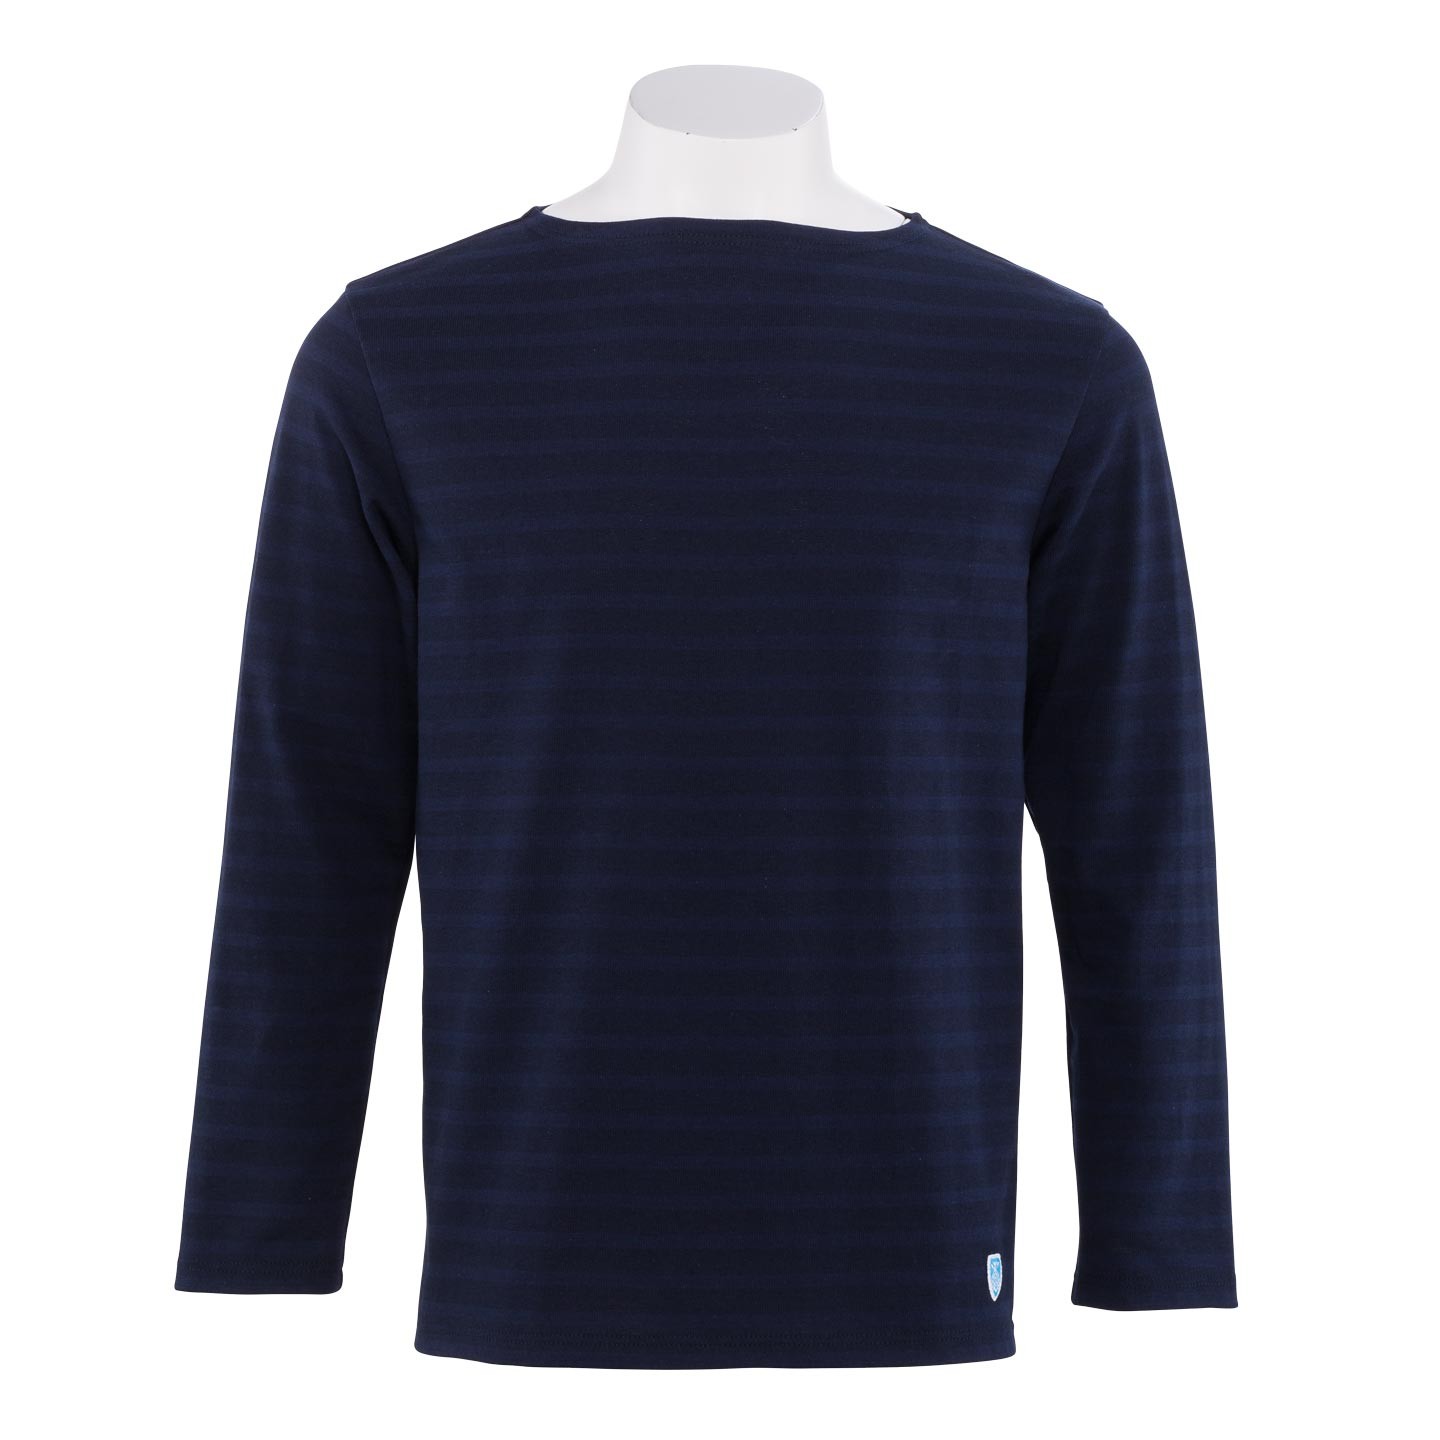 Striped shirt Navy / Marine, unisex made in france Orcival